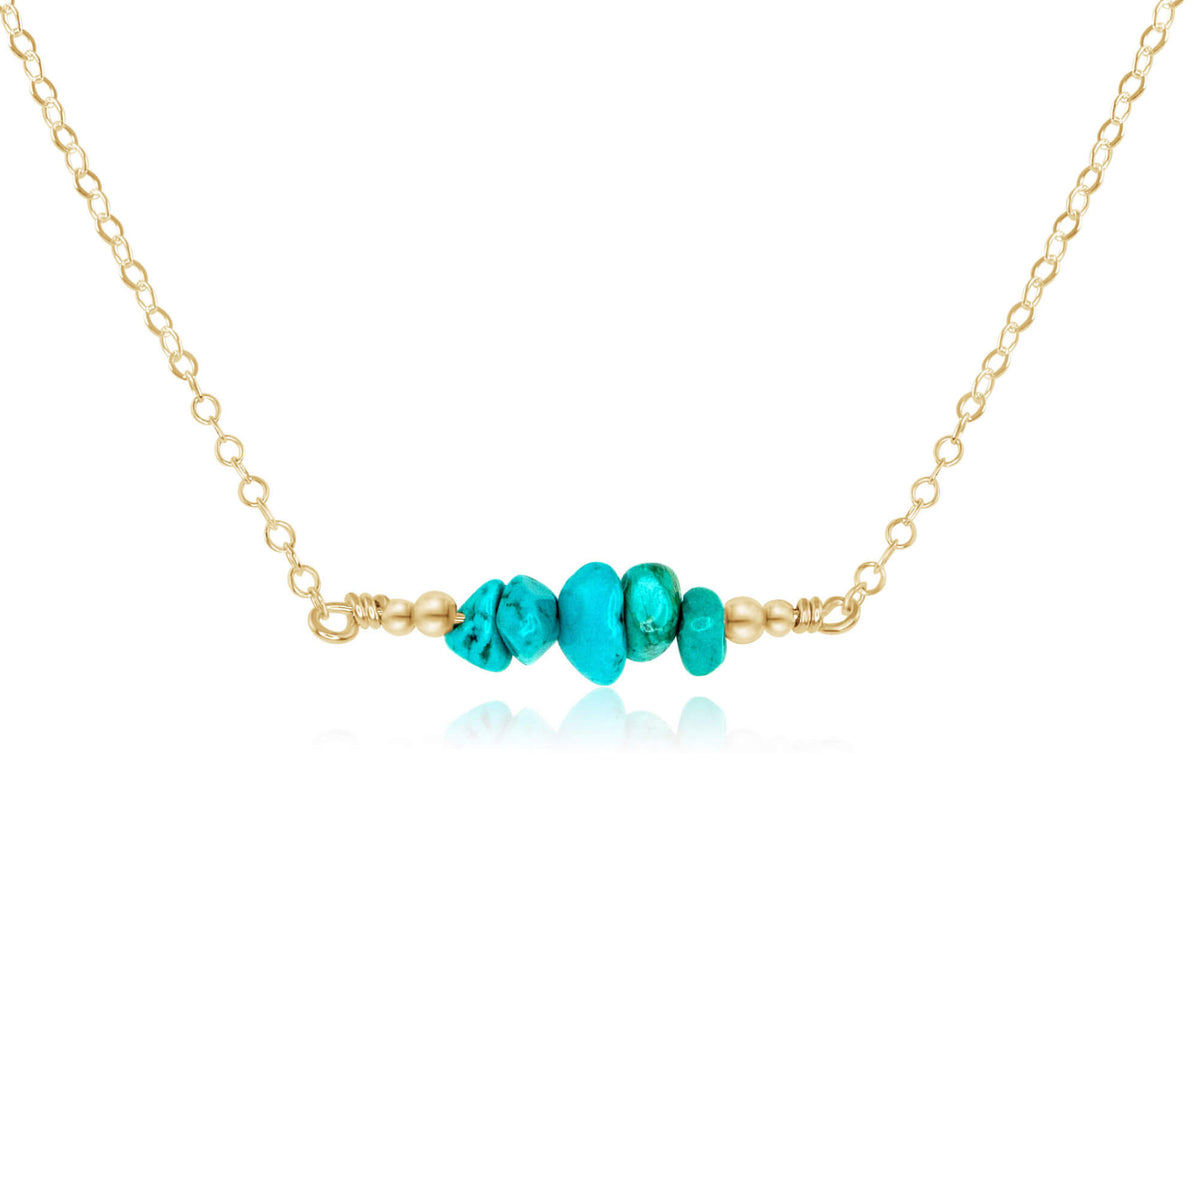 Chip Bead Bar Necklace - Turquoise - 14K Gold Fill - Luna Tide Handmade Jewellery